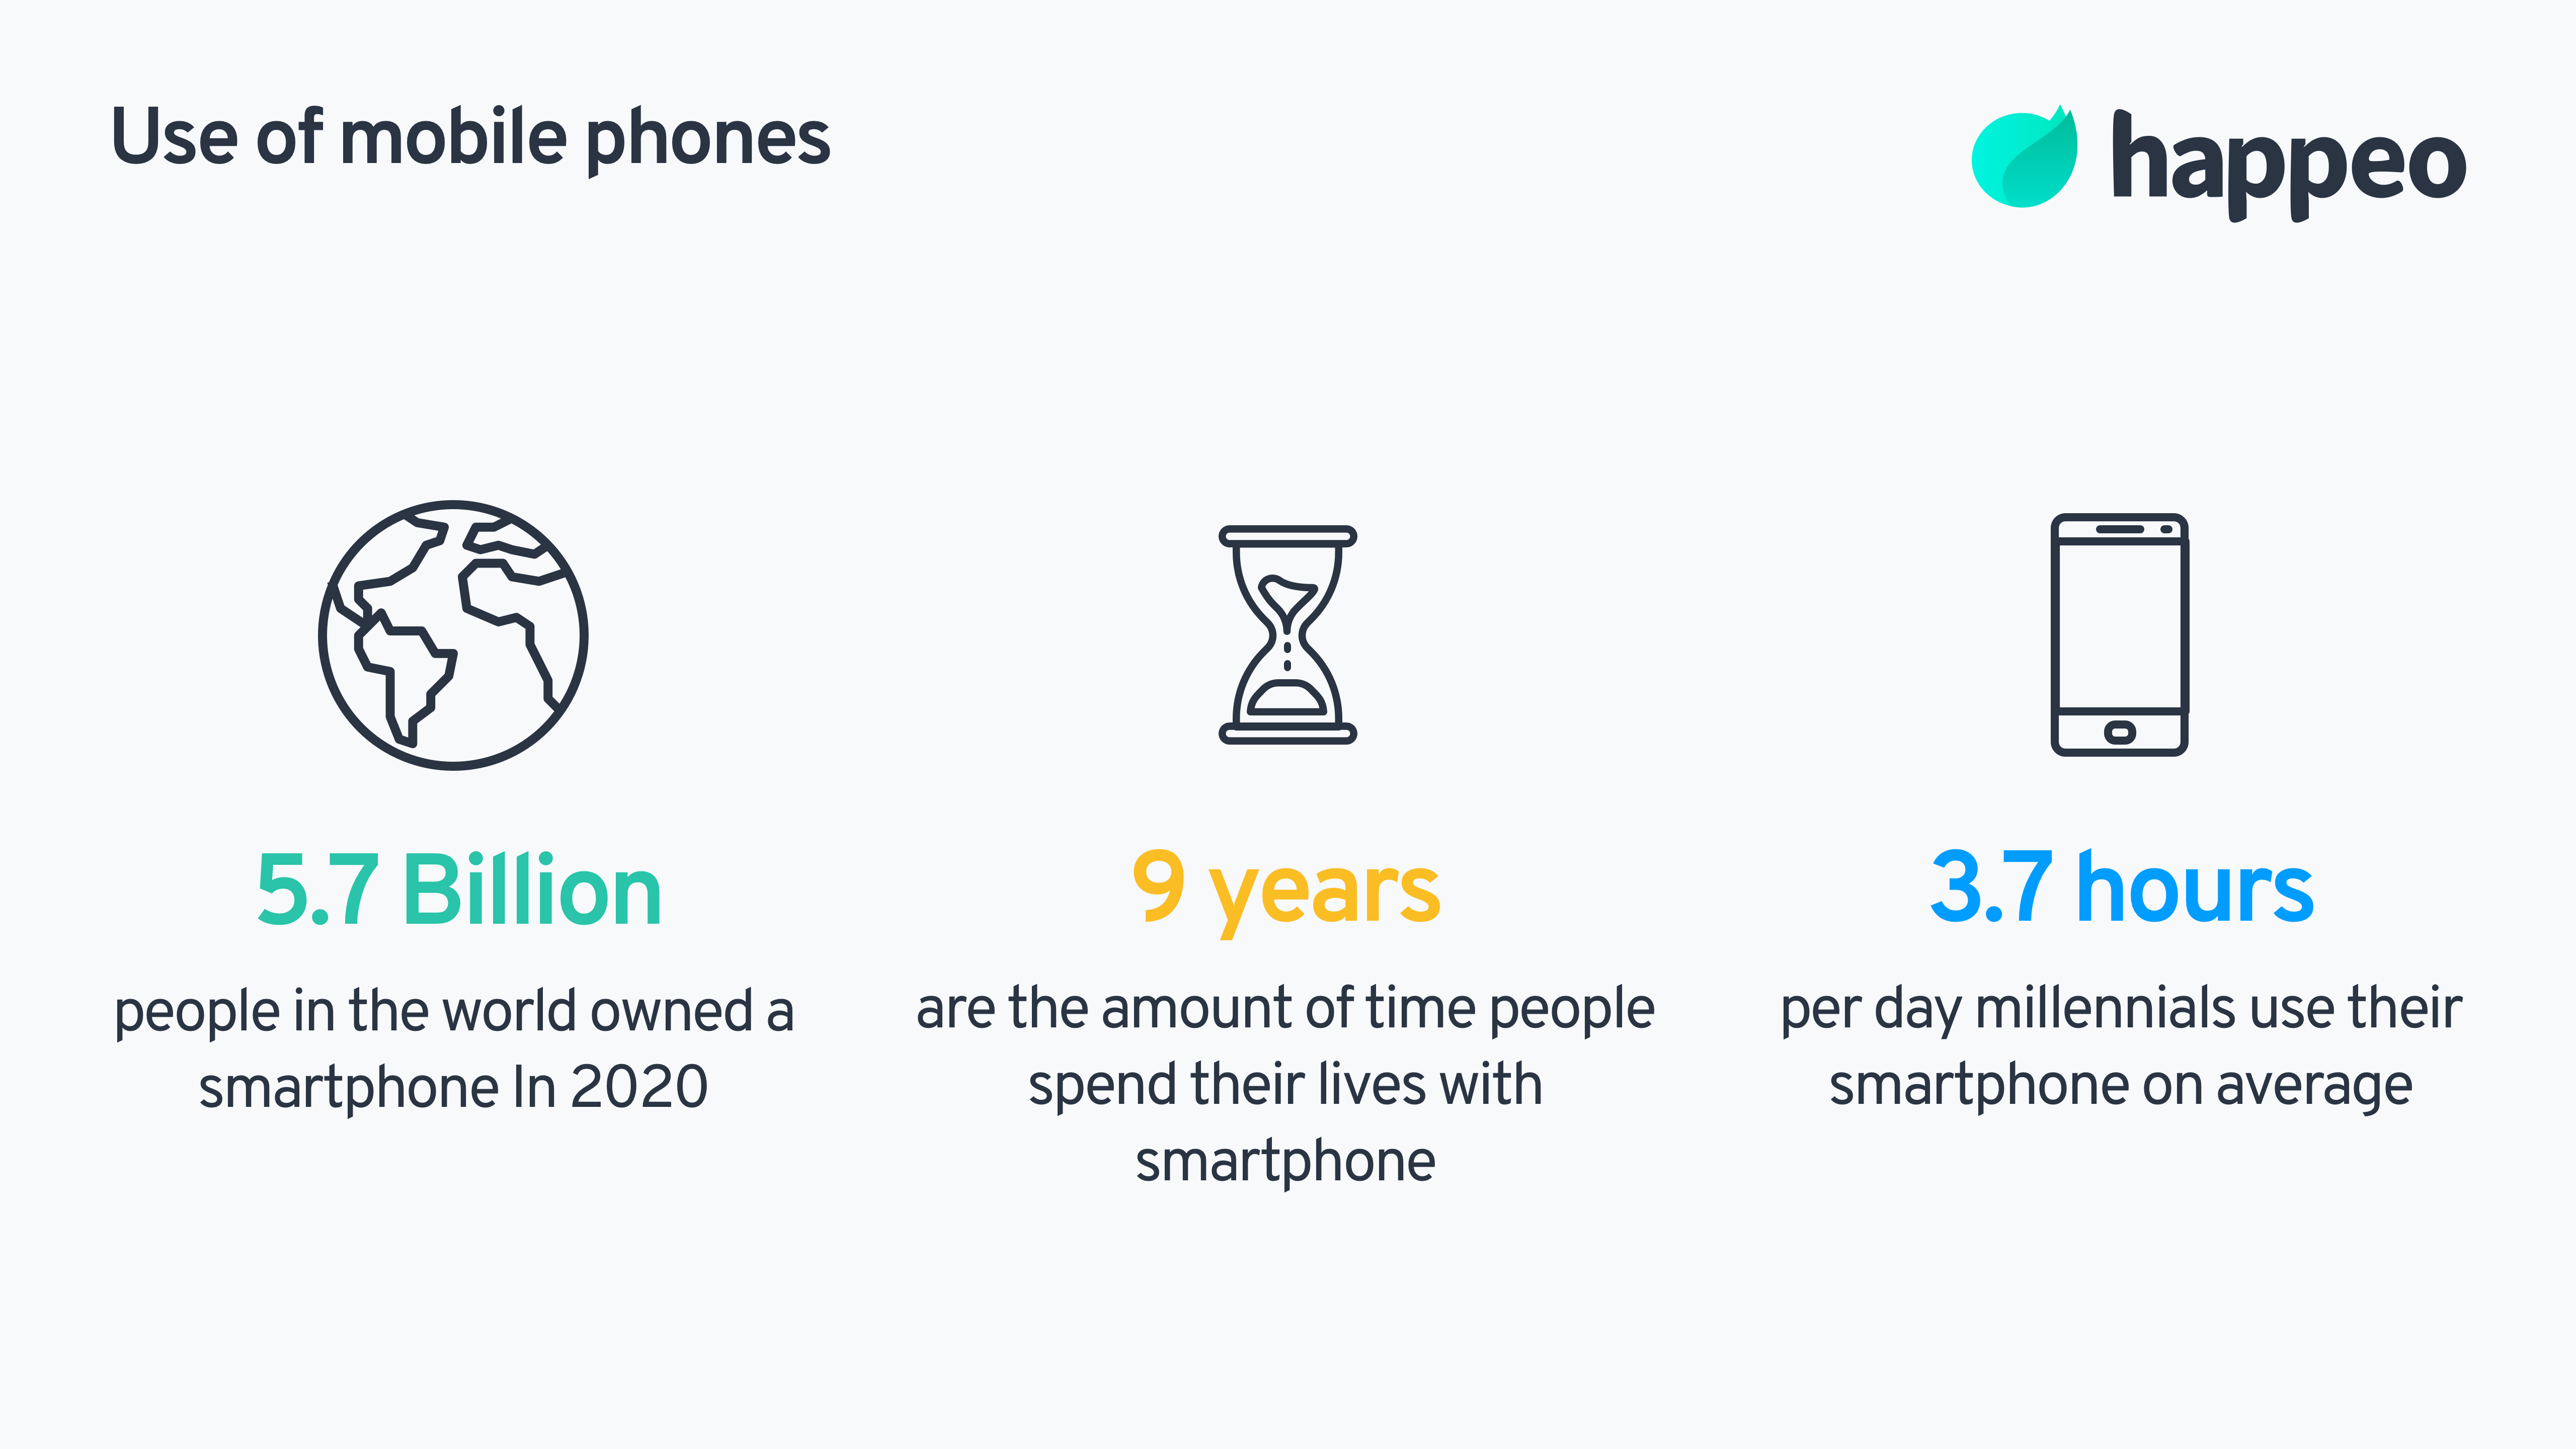 In 2020 more than 5.7 billion people in the world owned a smartphone